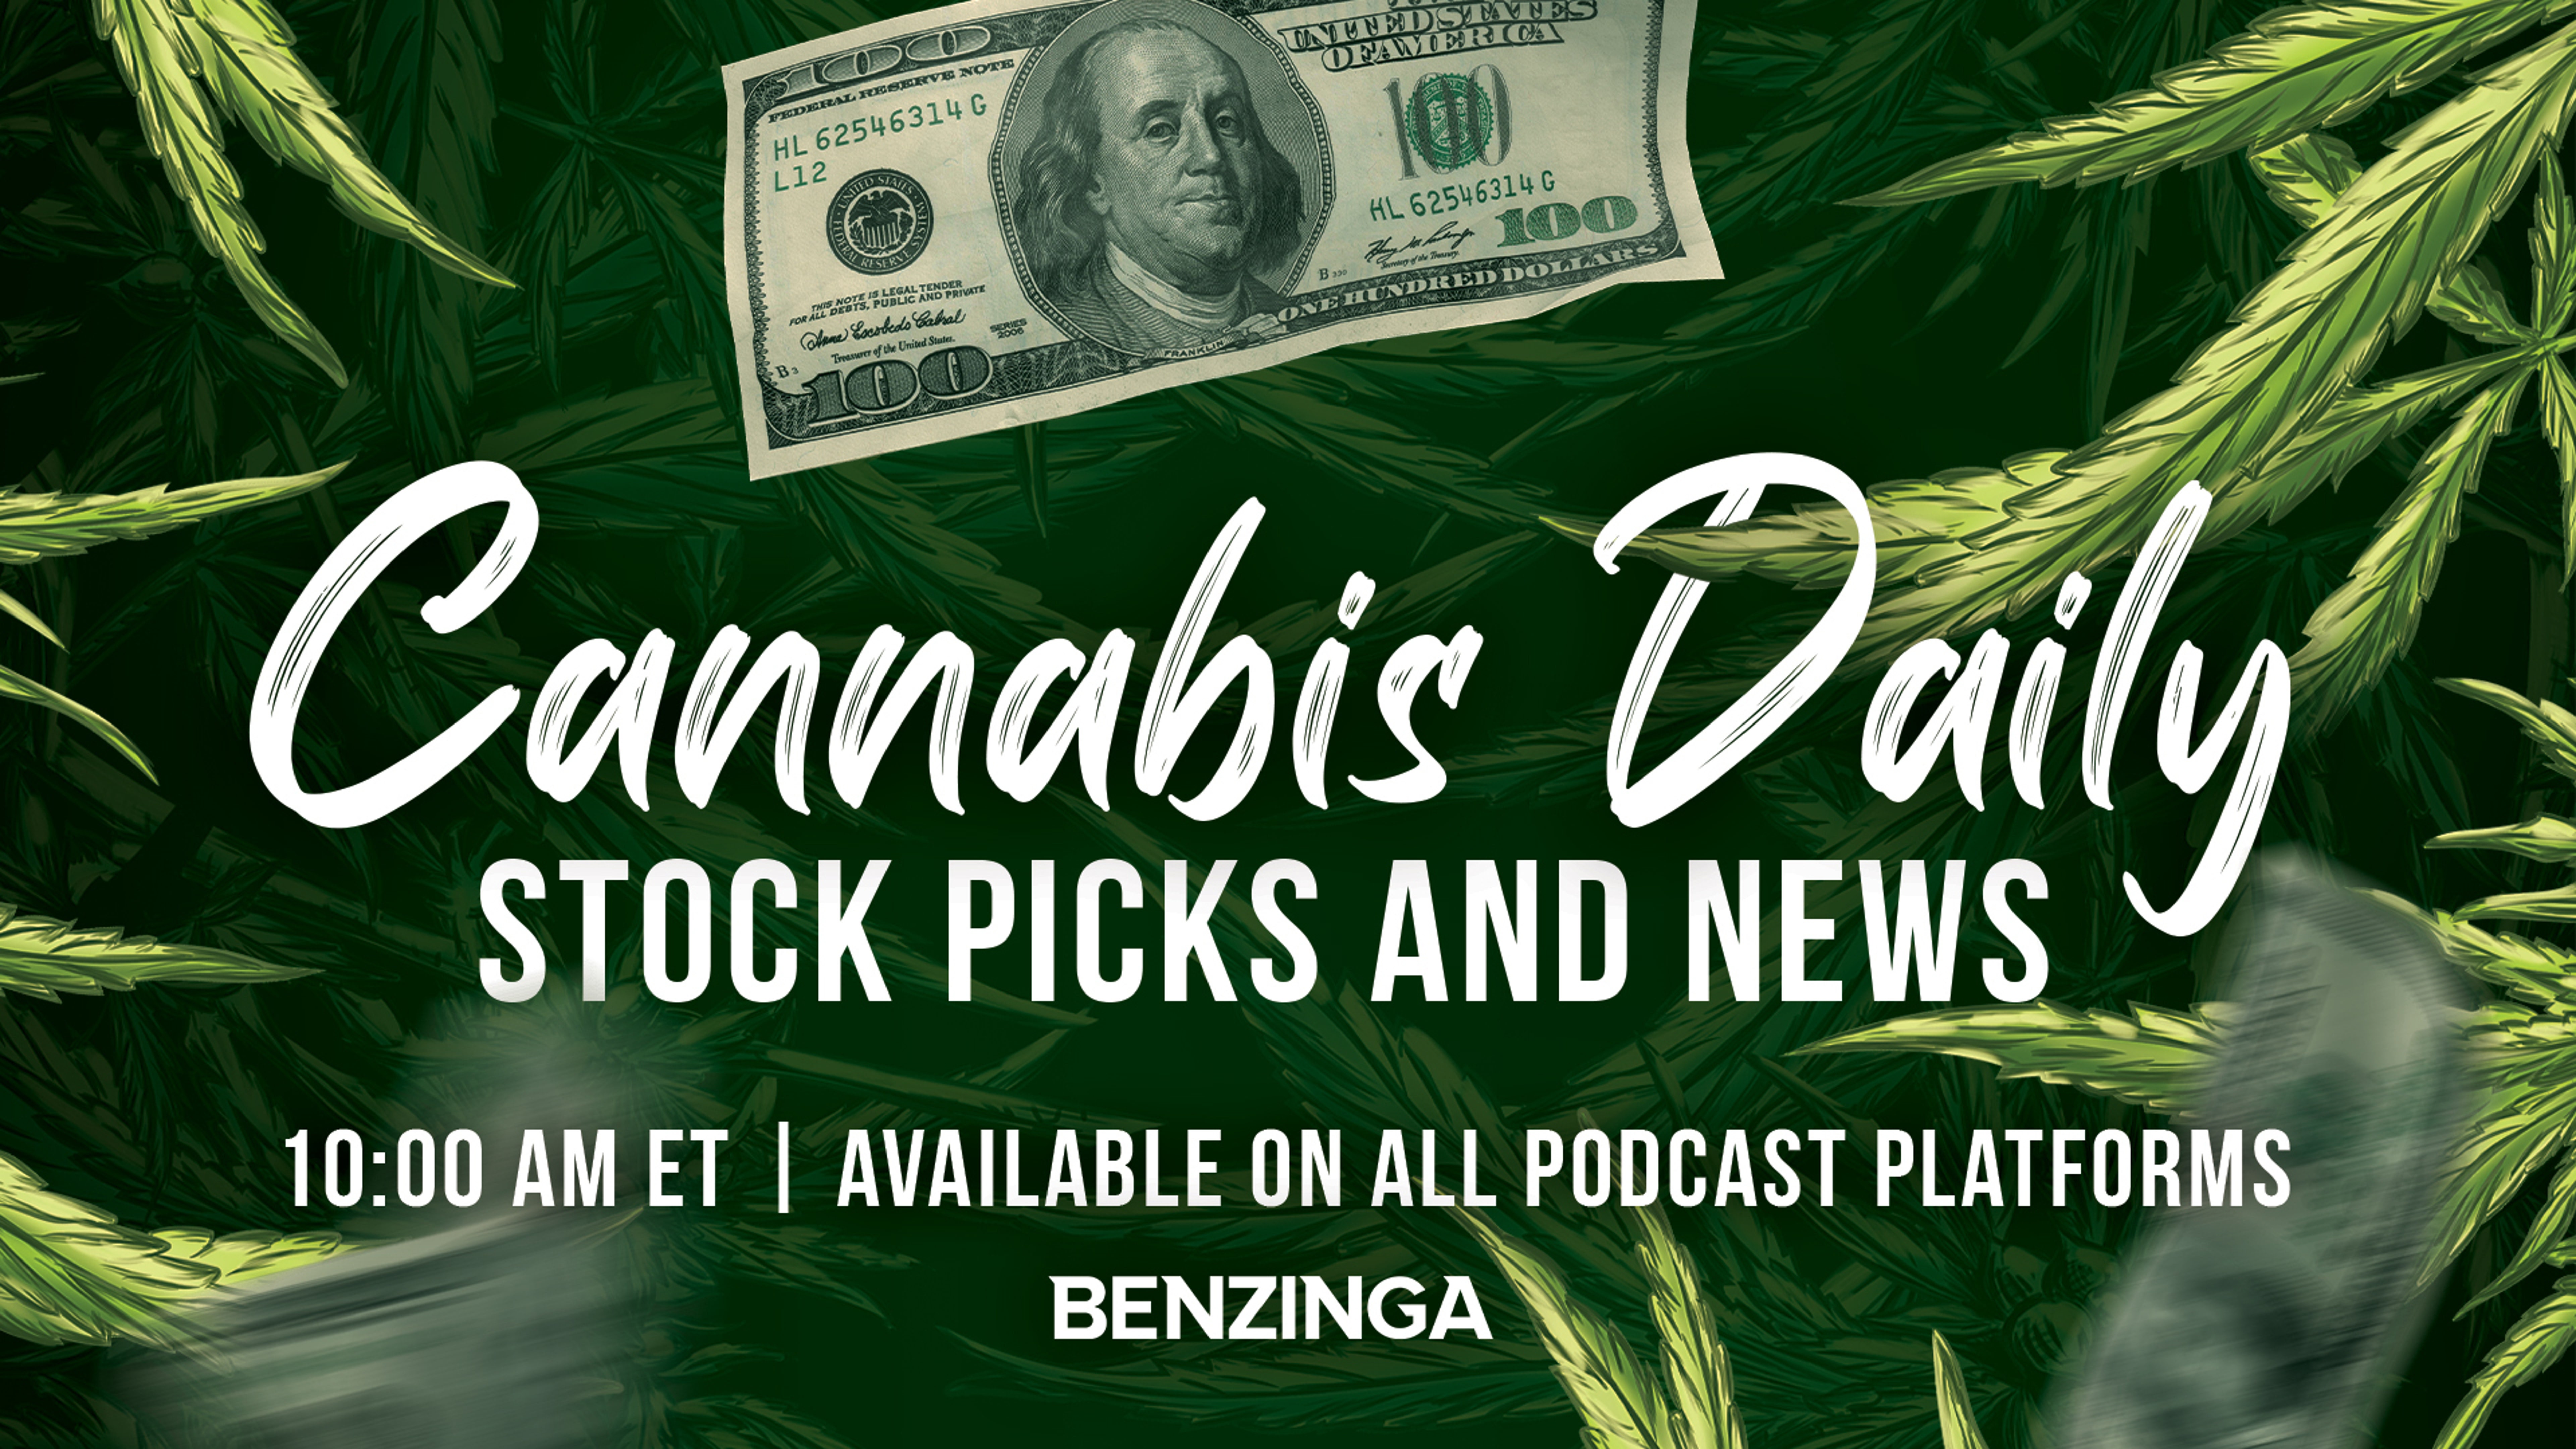 Support For Cannabis From Former Pres Bill Clinton? Hear It All On Cannabis Daily March 2, 2022